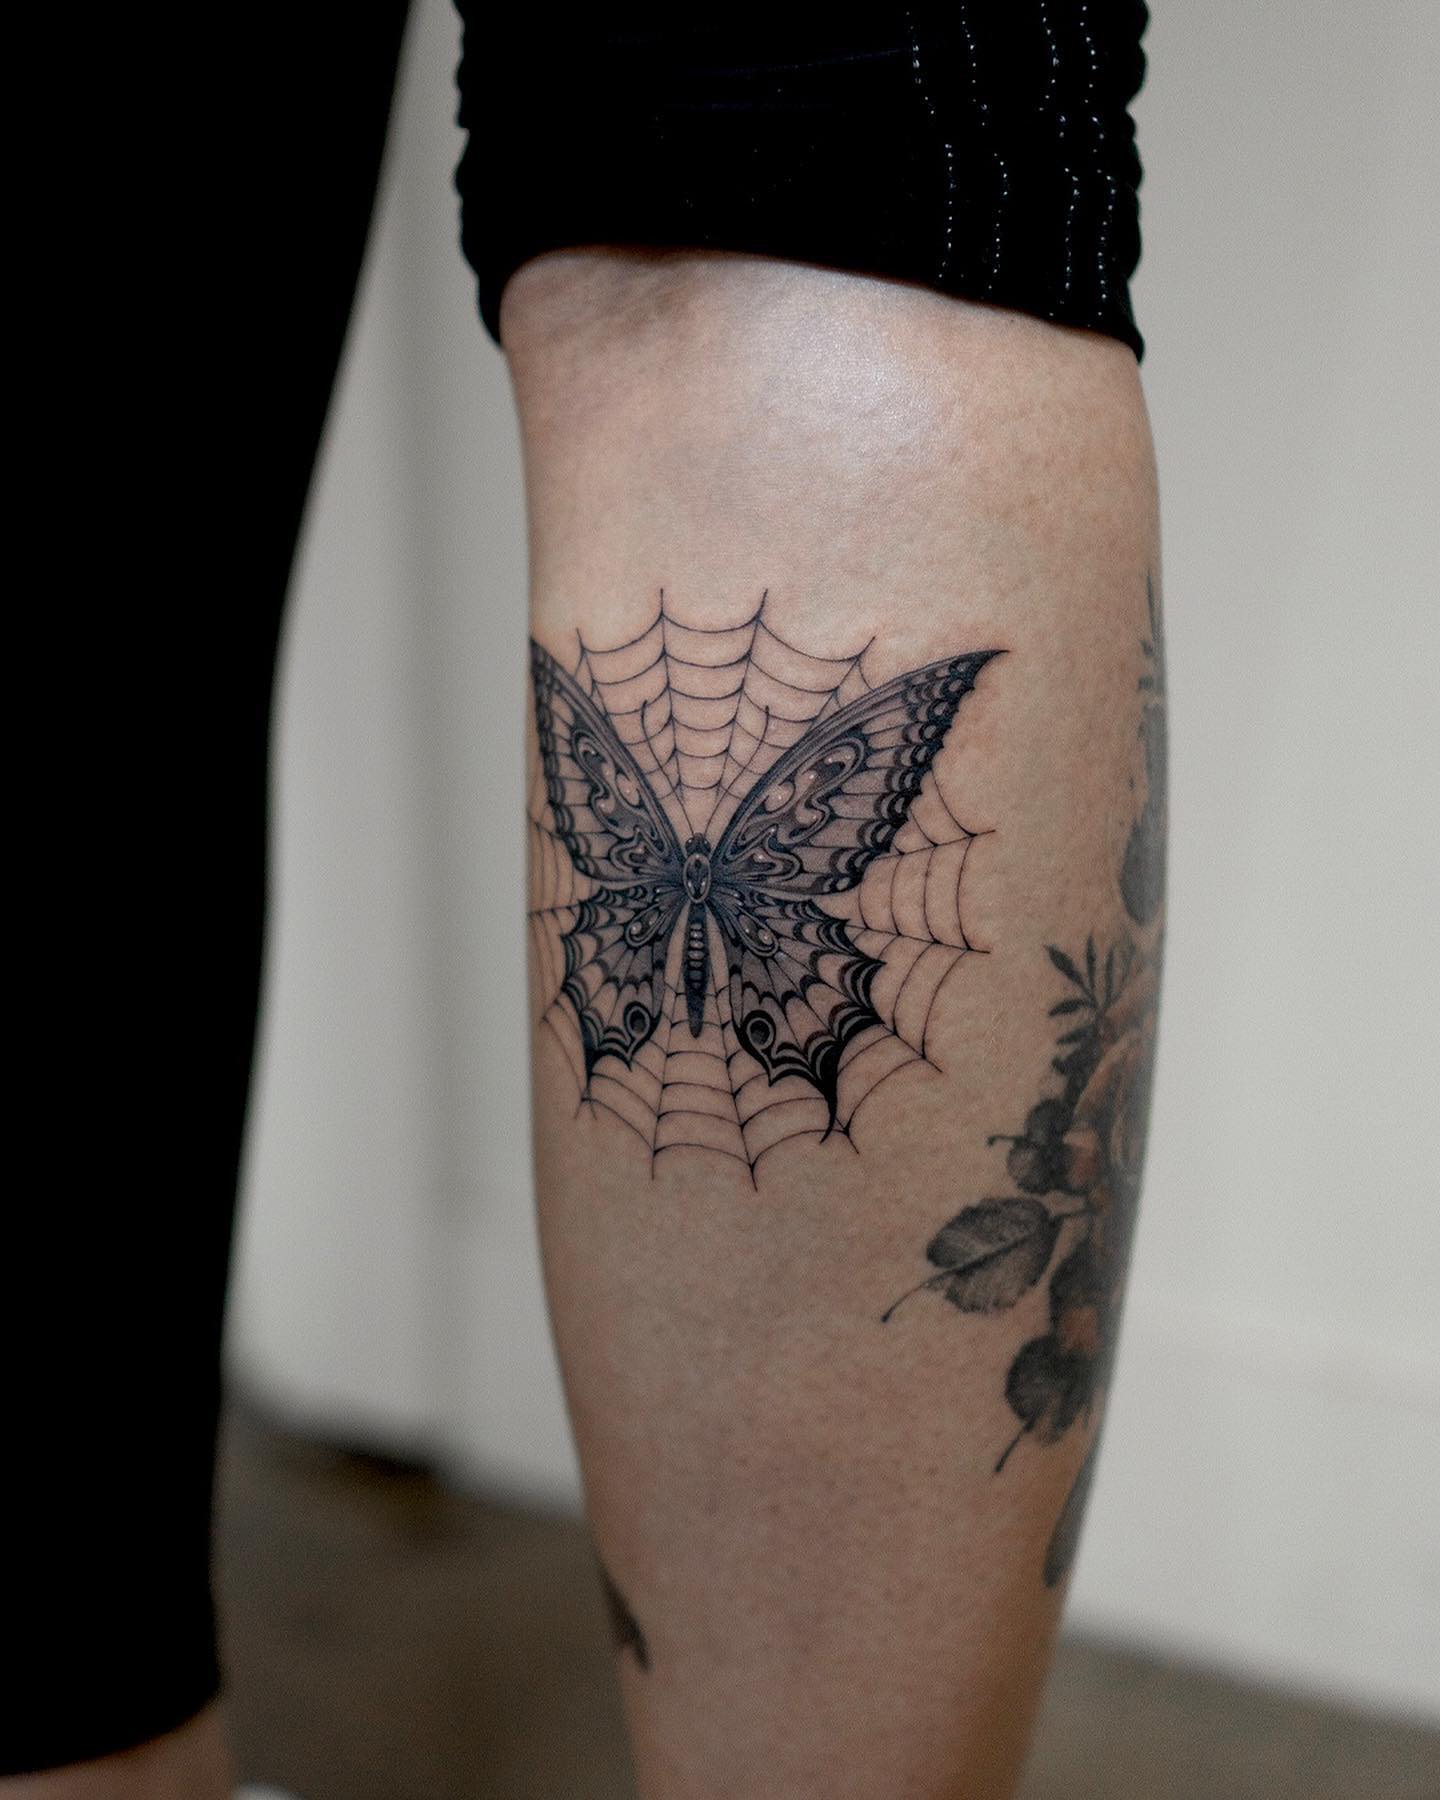 A spider web tattoo that has a butterfly in it will show both dedication and a strong will to get through any tricky situation in your life.